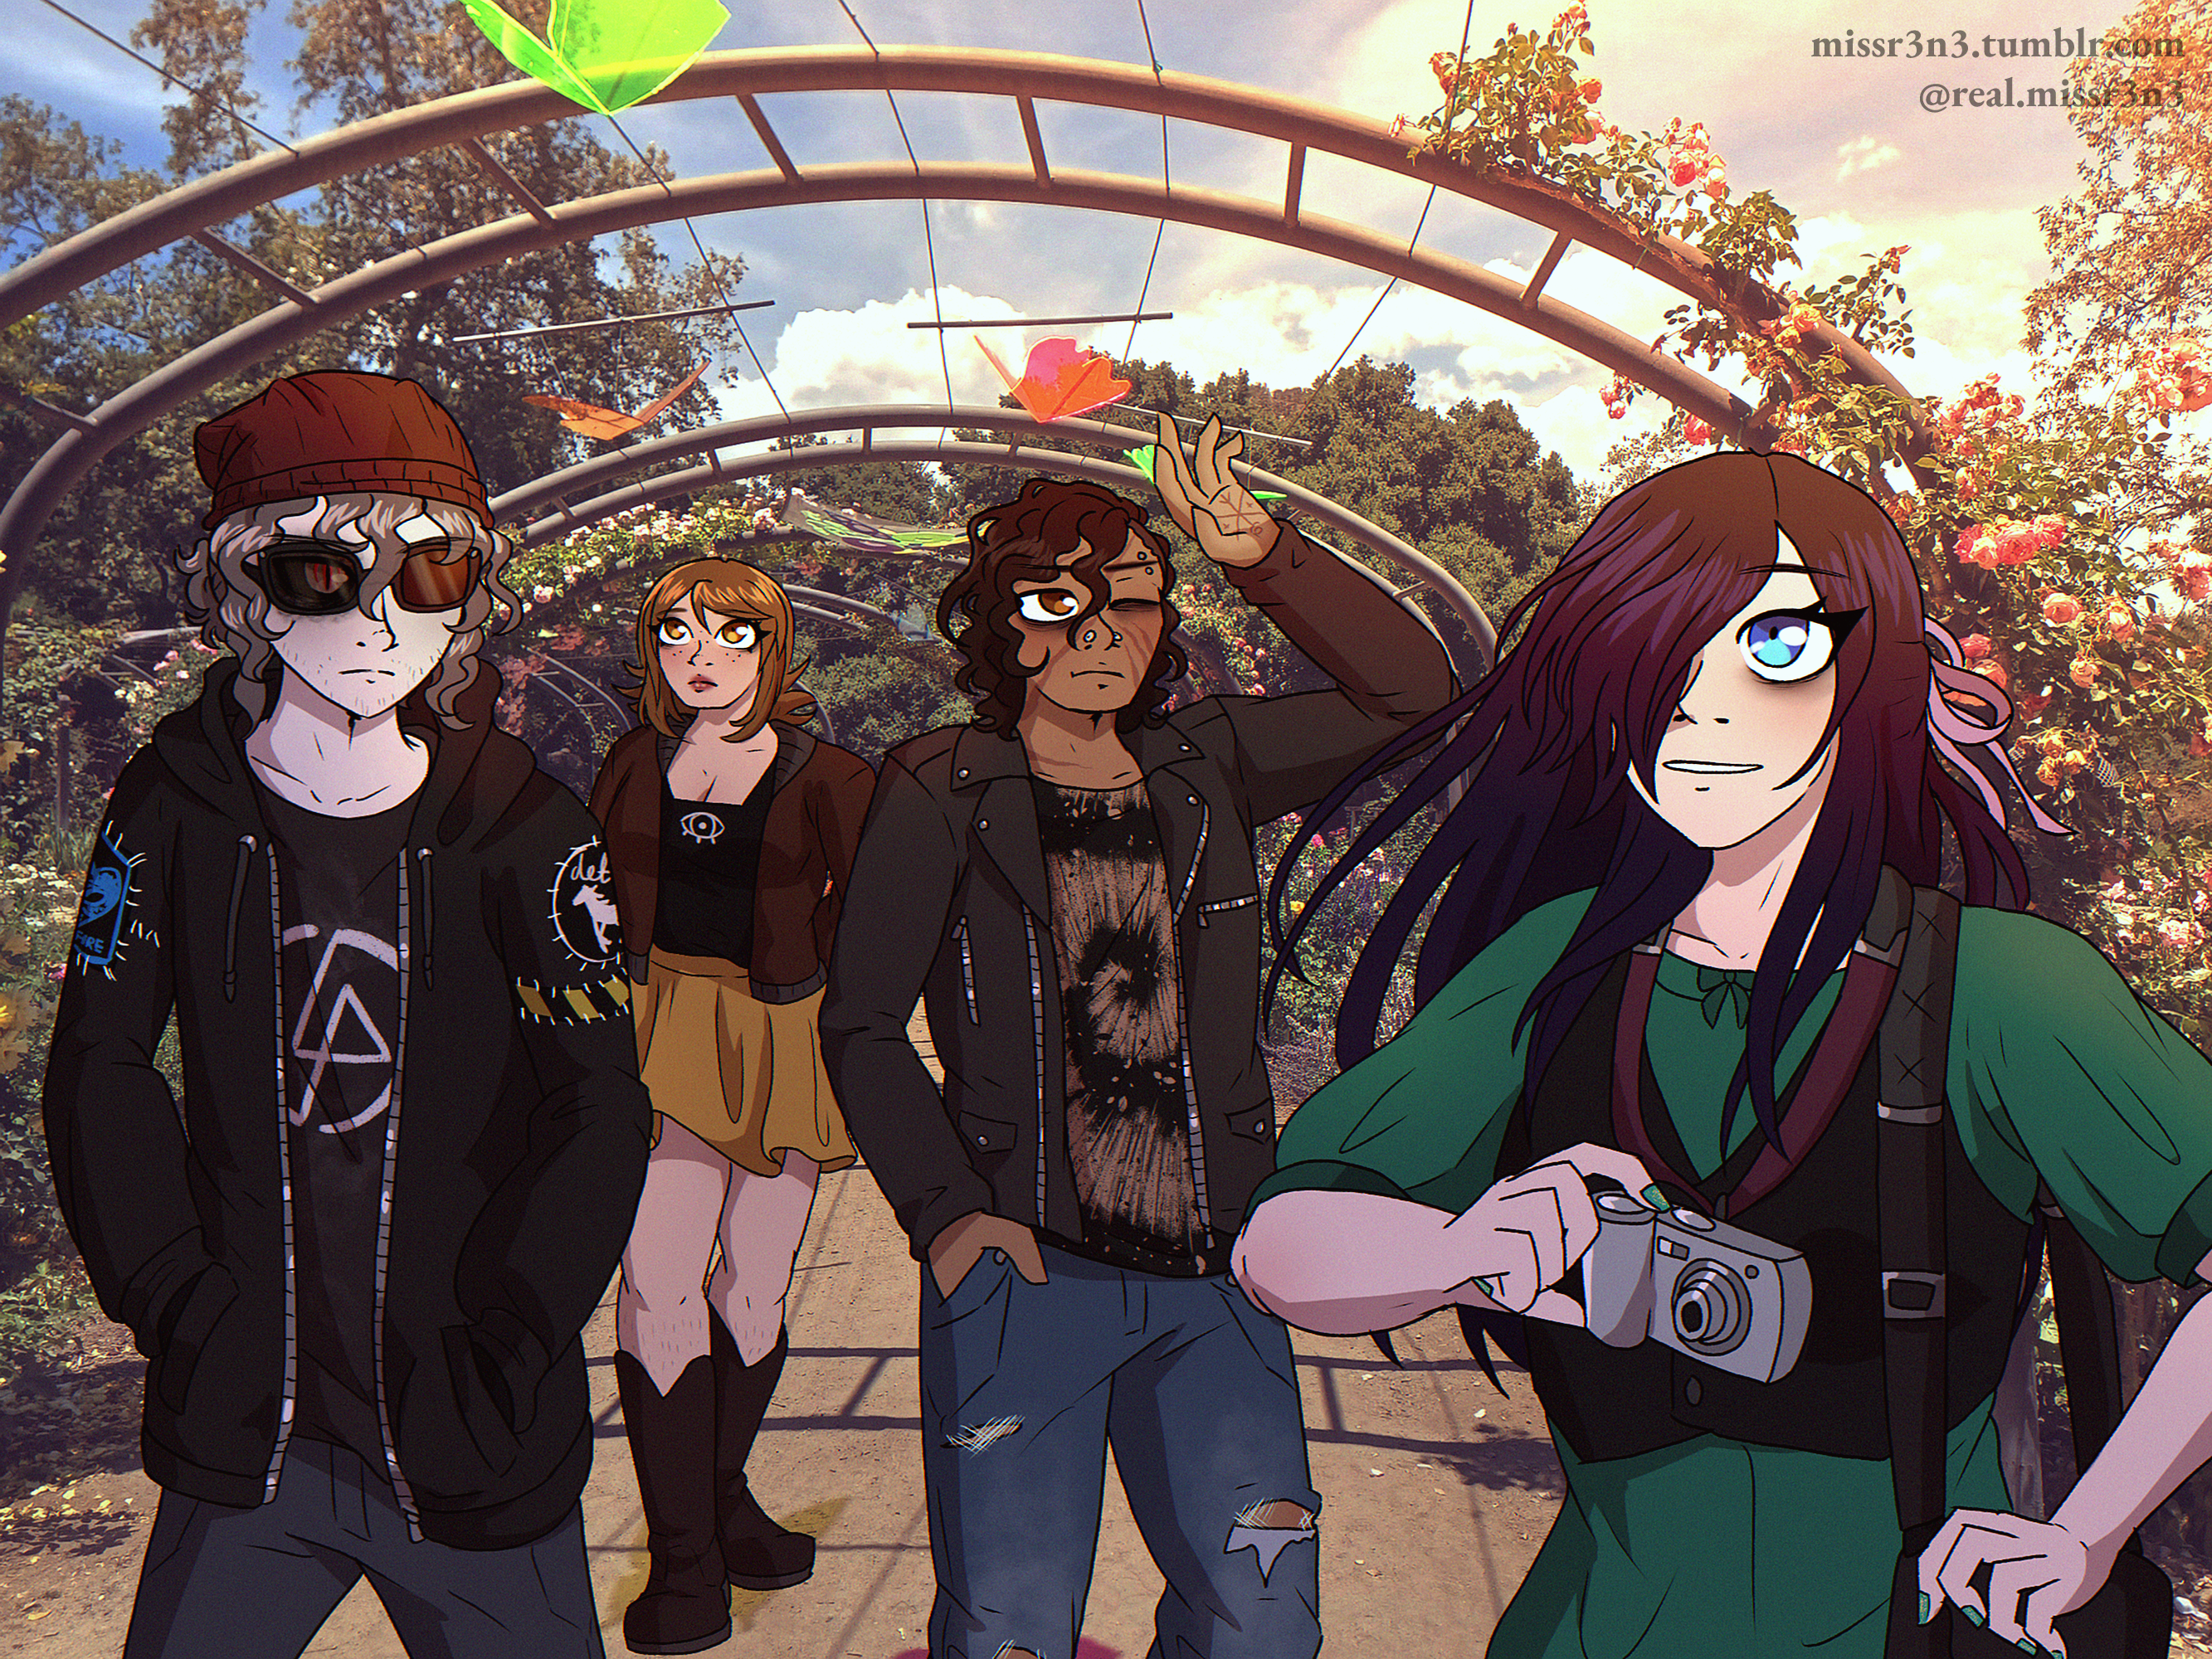 the main cast except for jessie drawn over a photograph from the descanso gardens. leah trails at the back. isaac shields his eyes from the sun. joshua watches over madeline. he's wearing leah's beanie and some wayfarer sunglasses to hide his snake eyes and horns. madeline excitedly looks at the flowers with her nikon held at the ready.